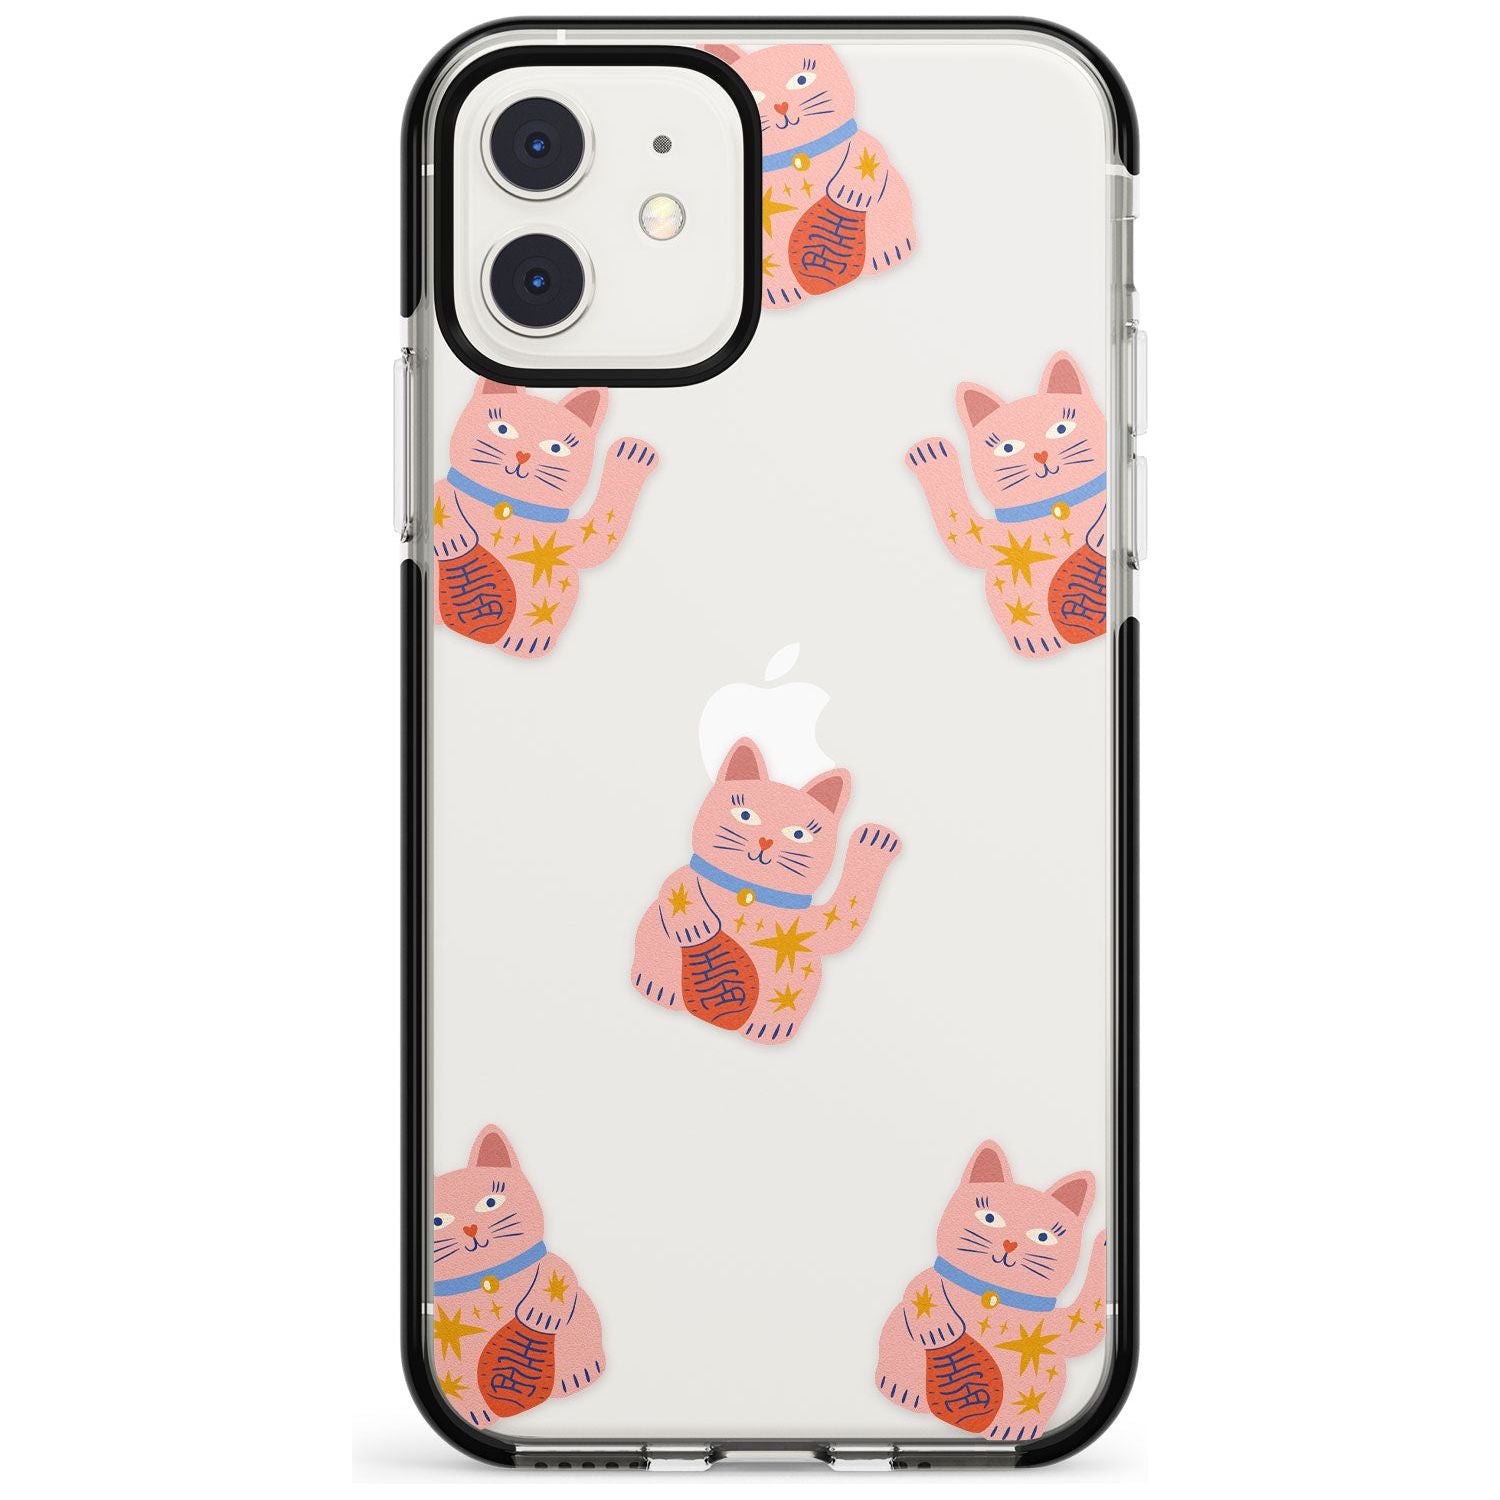 Waving Cat Pattern Black Impact Phone Case for iPhone 11 Pro Max